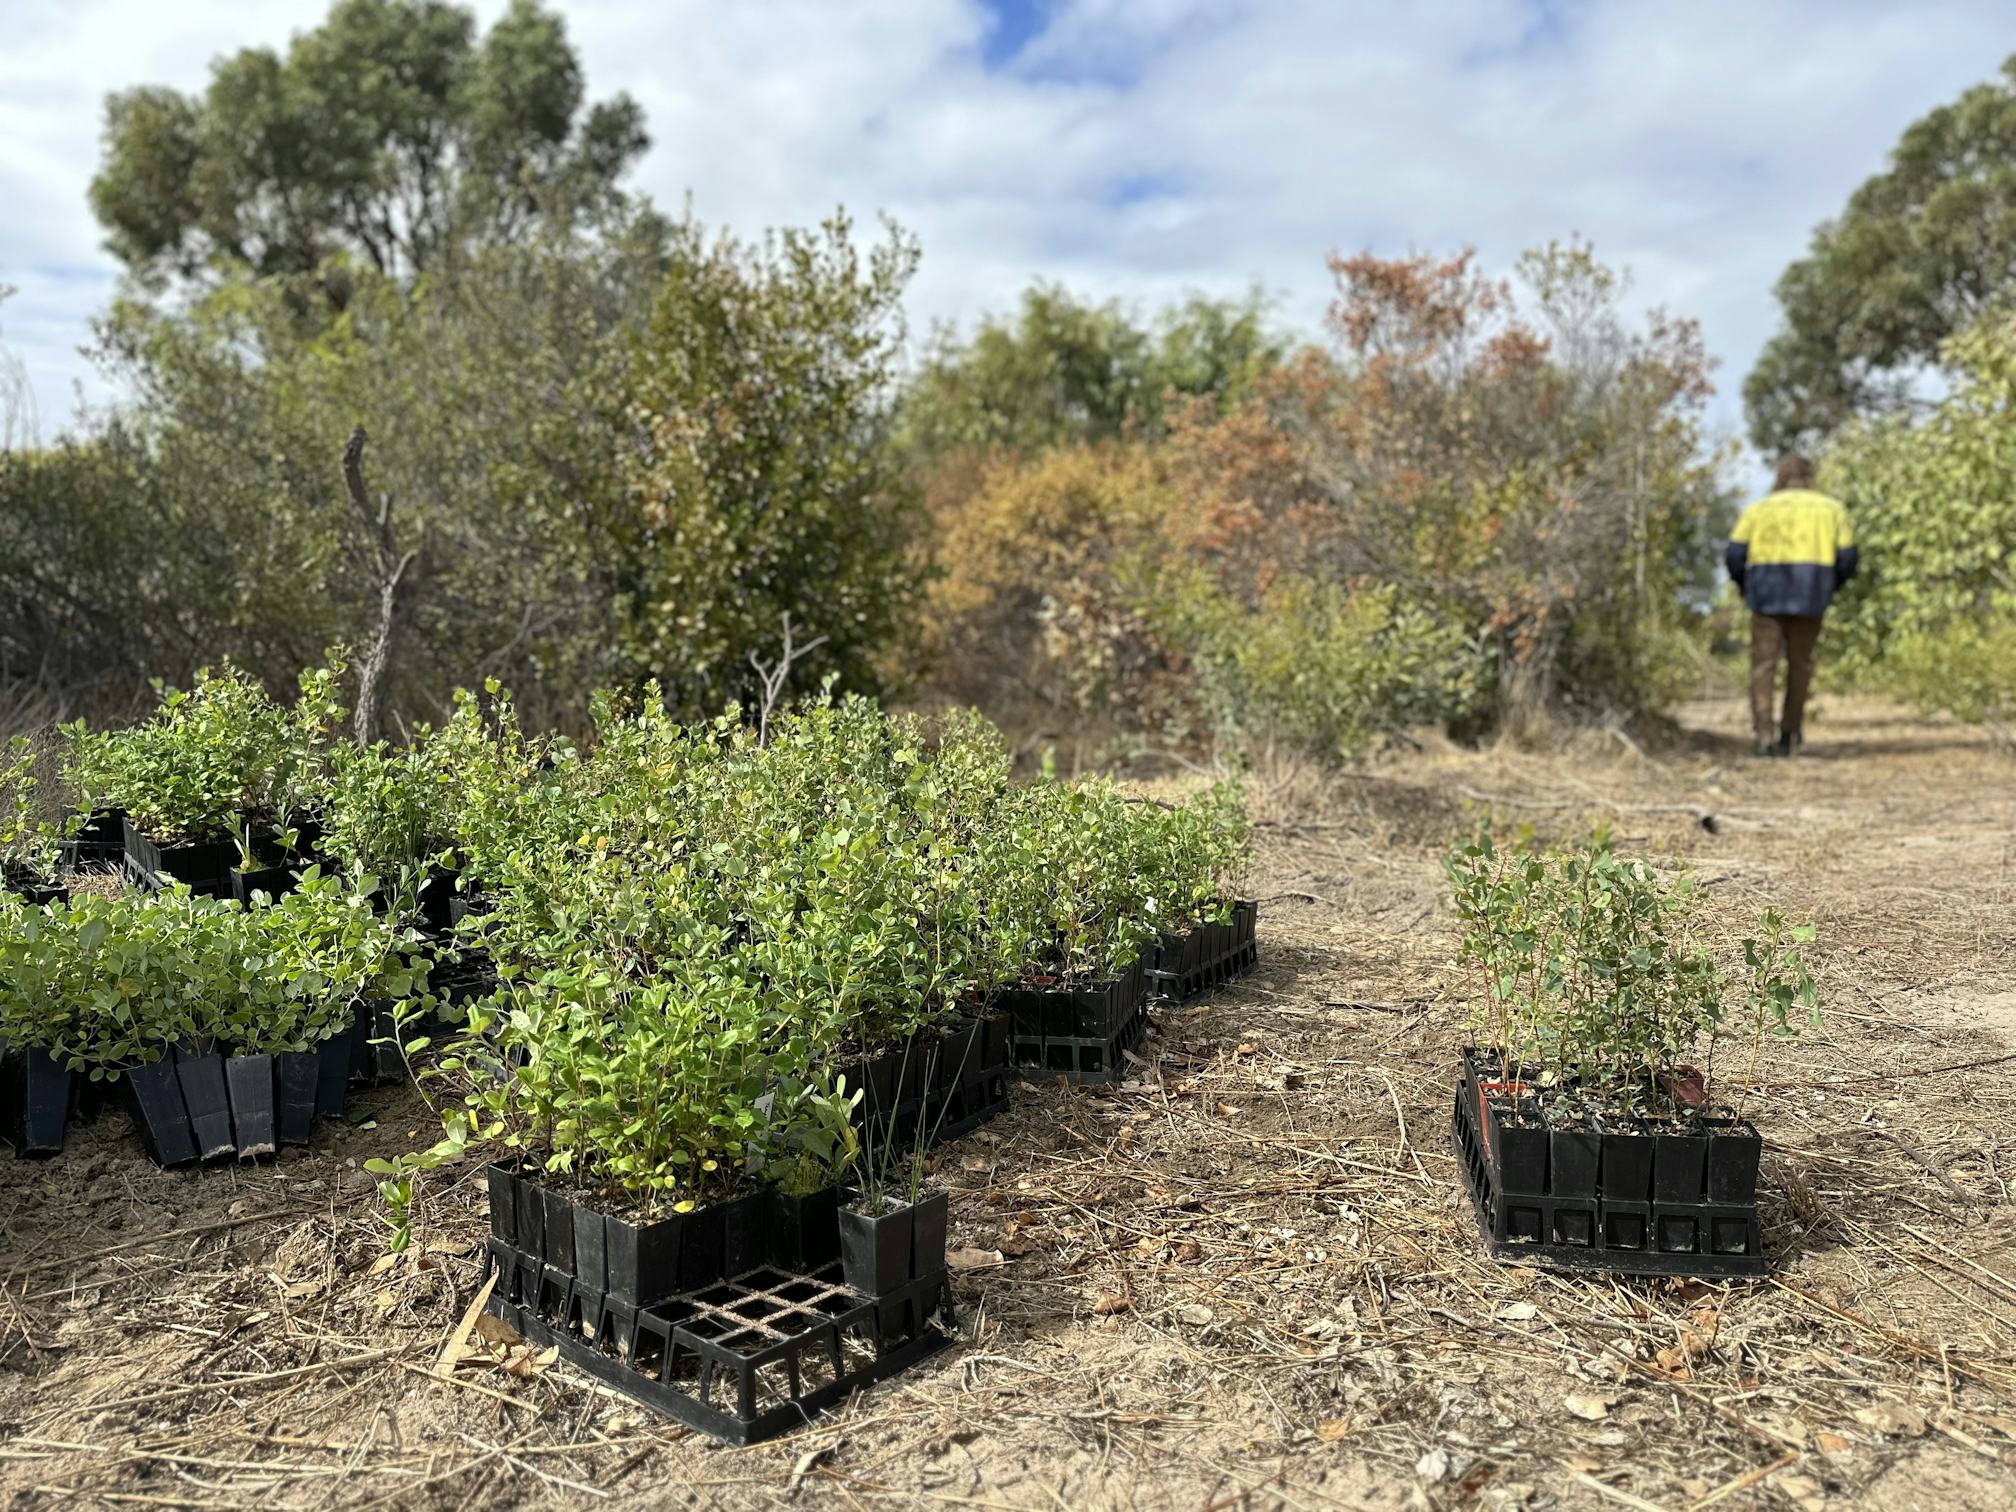 Seedlings and shrubs on the ground to be planted (Image: Conservation Volunteers Australia)